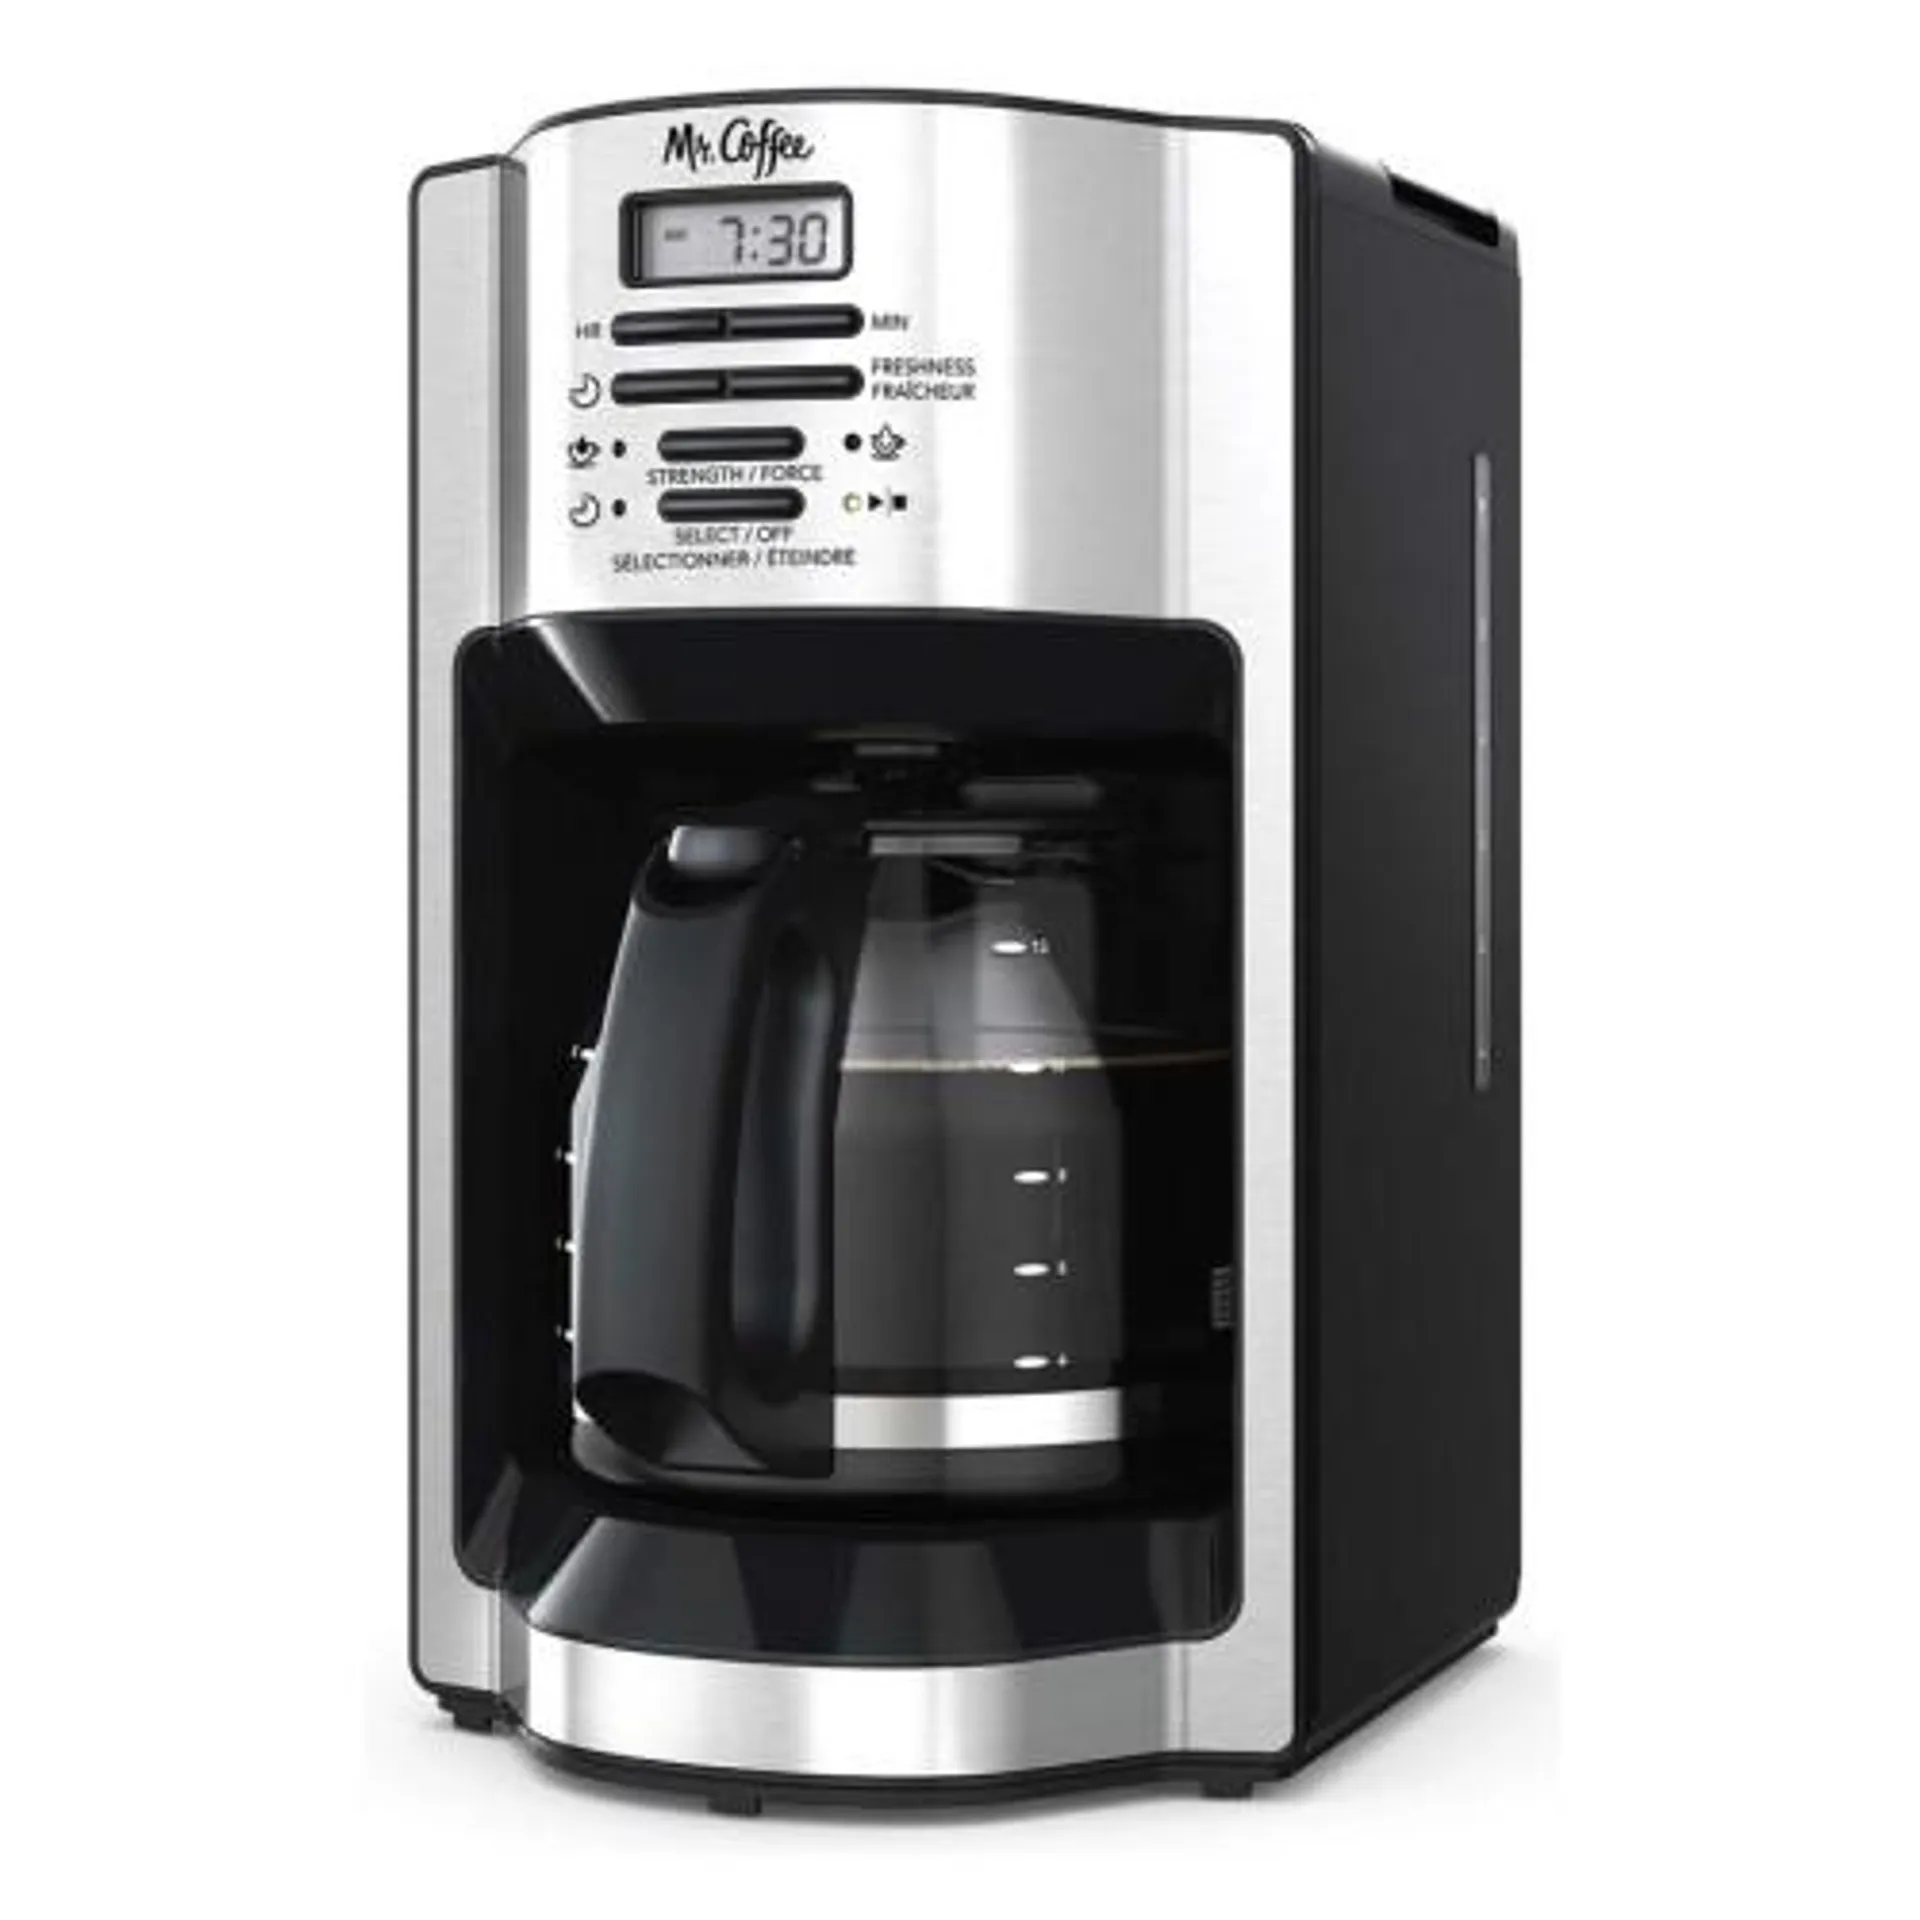 Mr.Coffee Oster 12 Cup Programmable Coffee Maker S.S